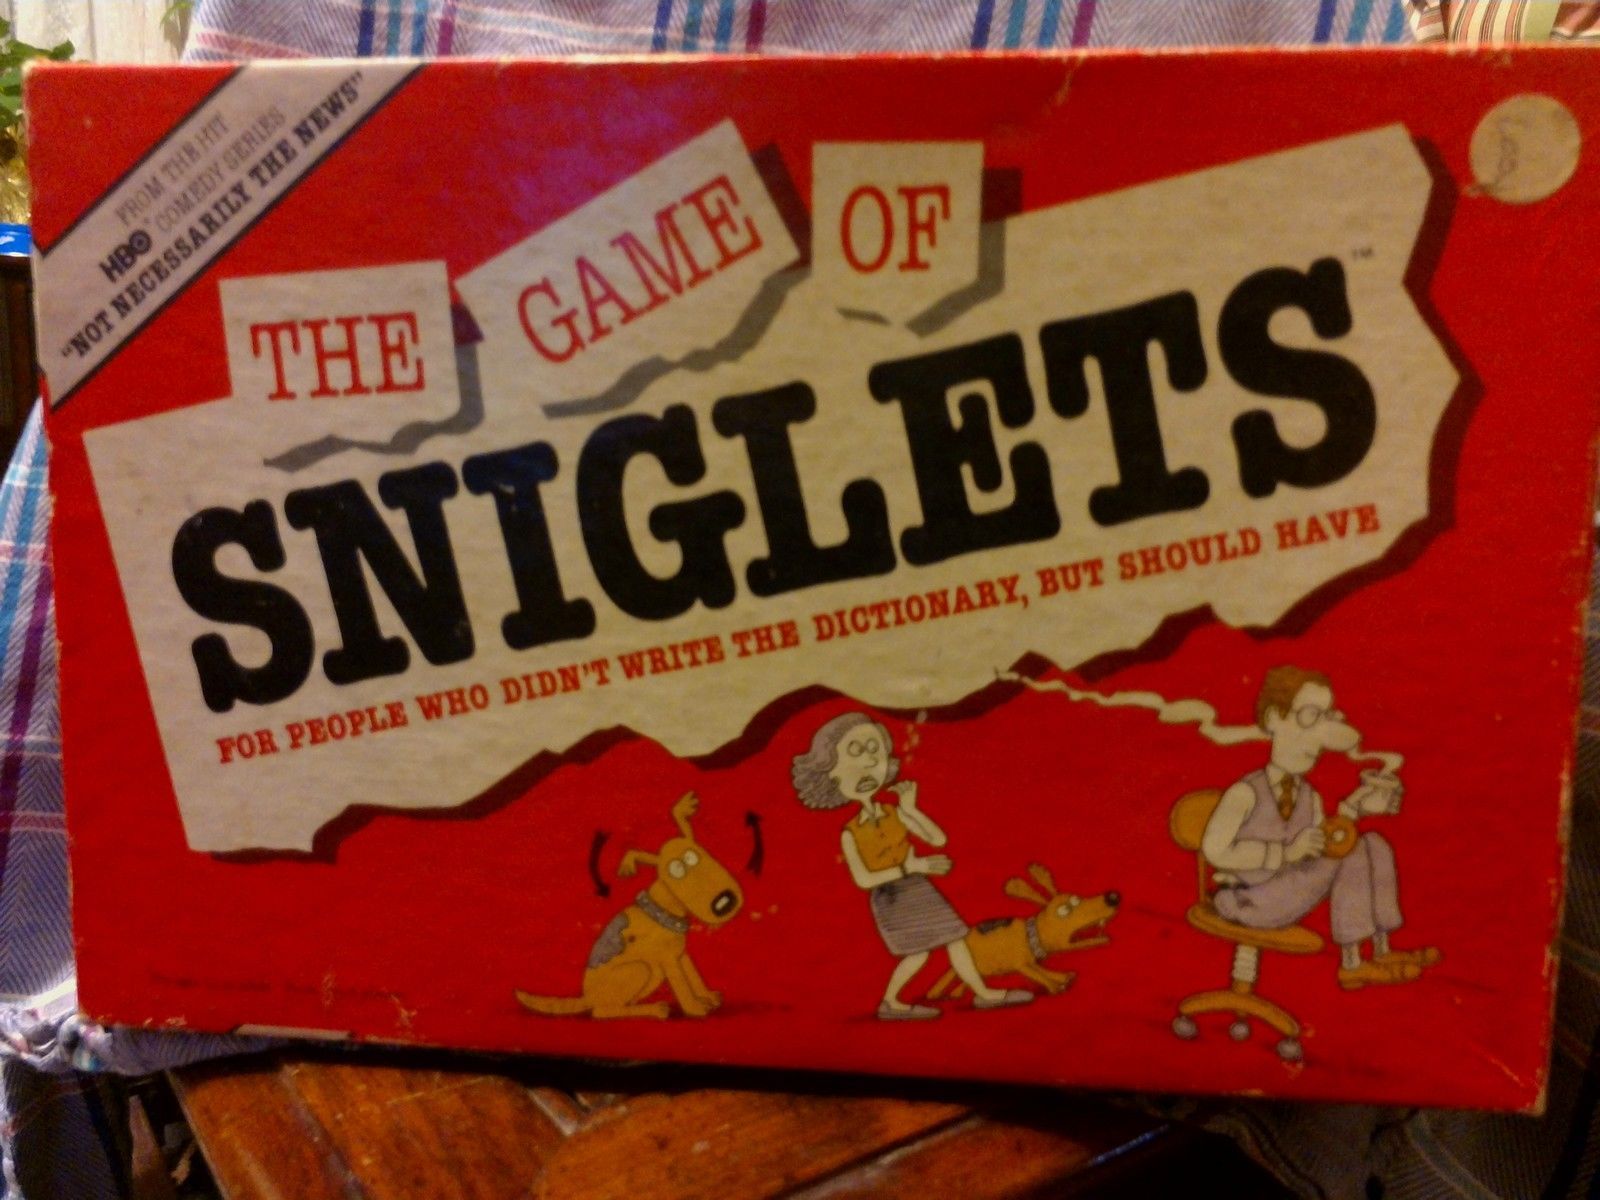 Sniglets The Game of Sniglets - HBO Comedy Series - Not Necessarity The News - $32.50